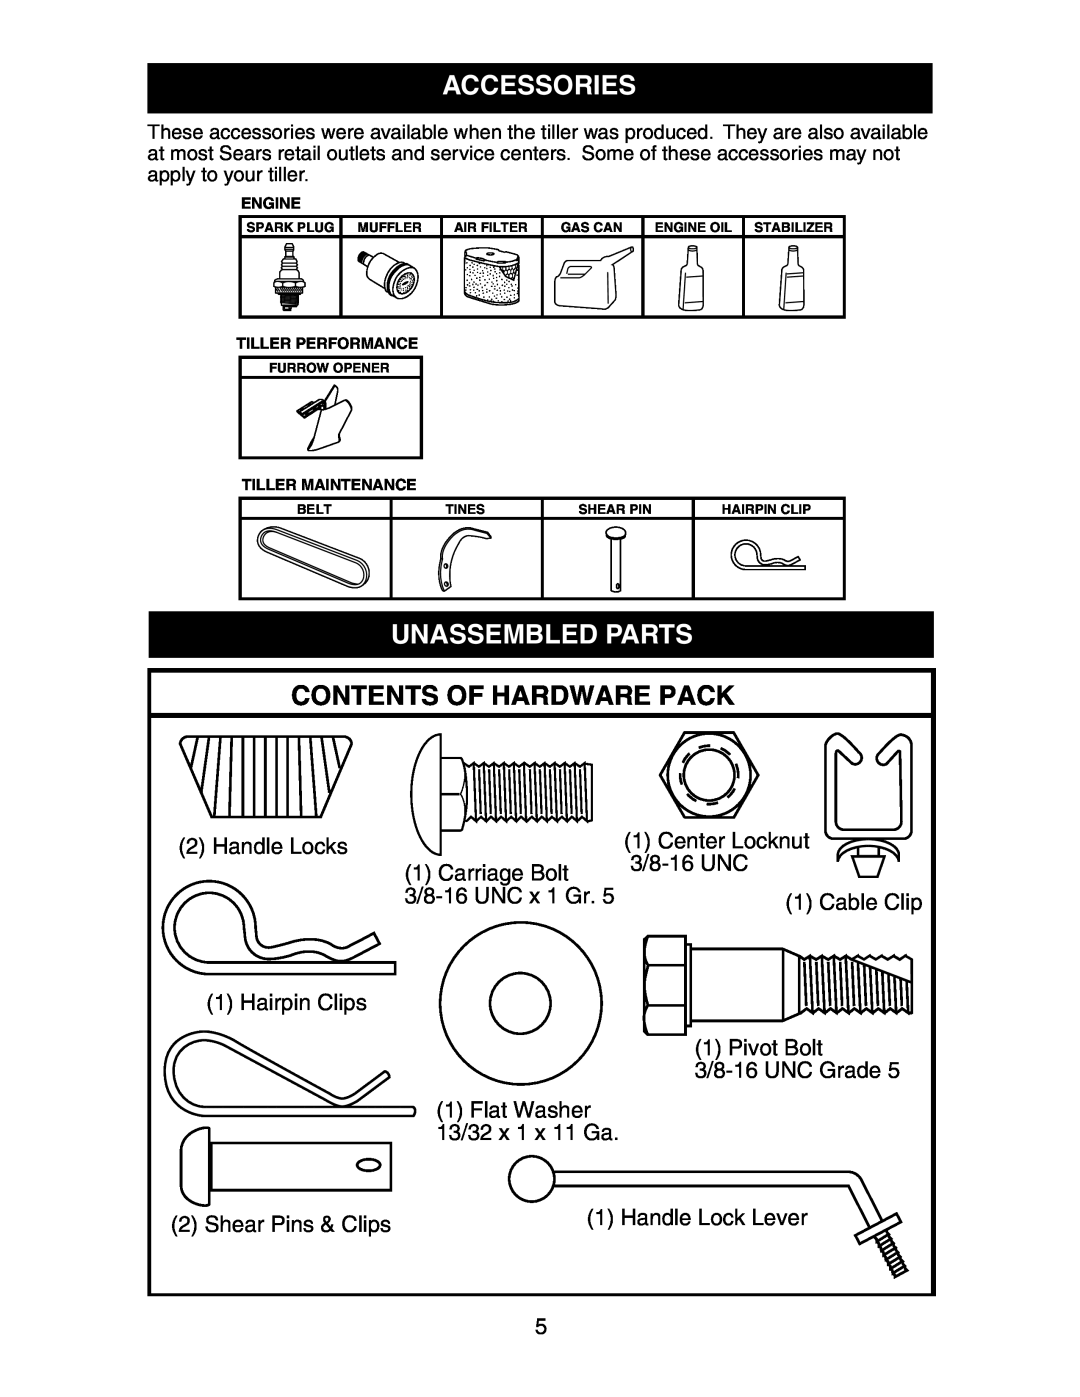 Sears 917.29425 owner manual Accessories, Unassembled Parts, Contents Of Hardware Pack 